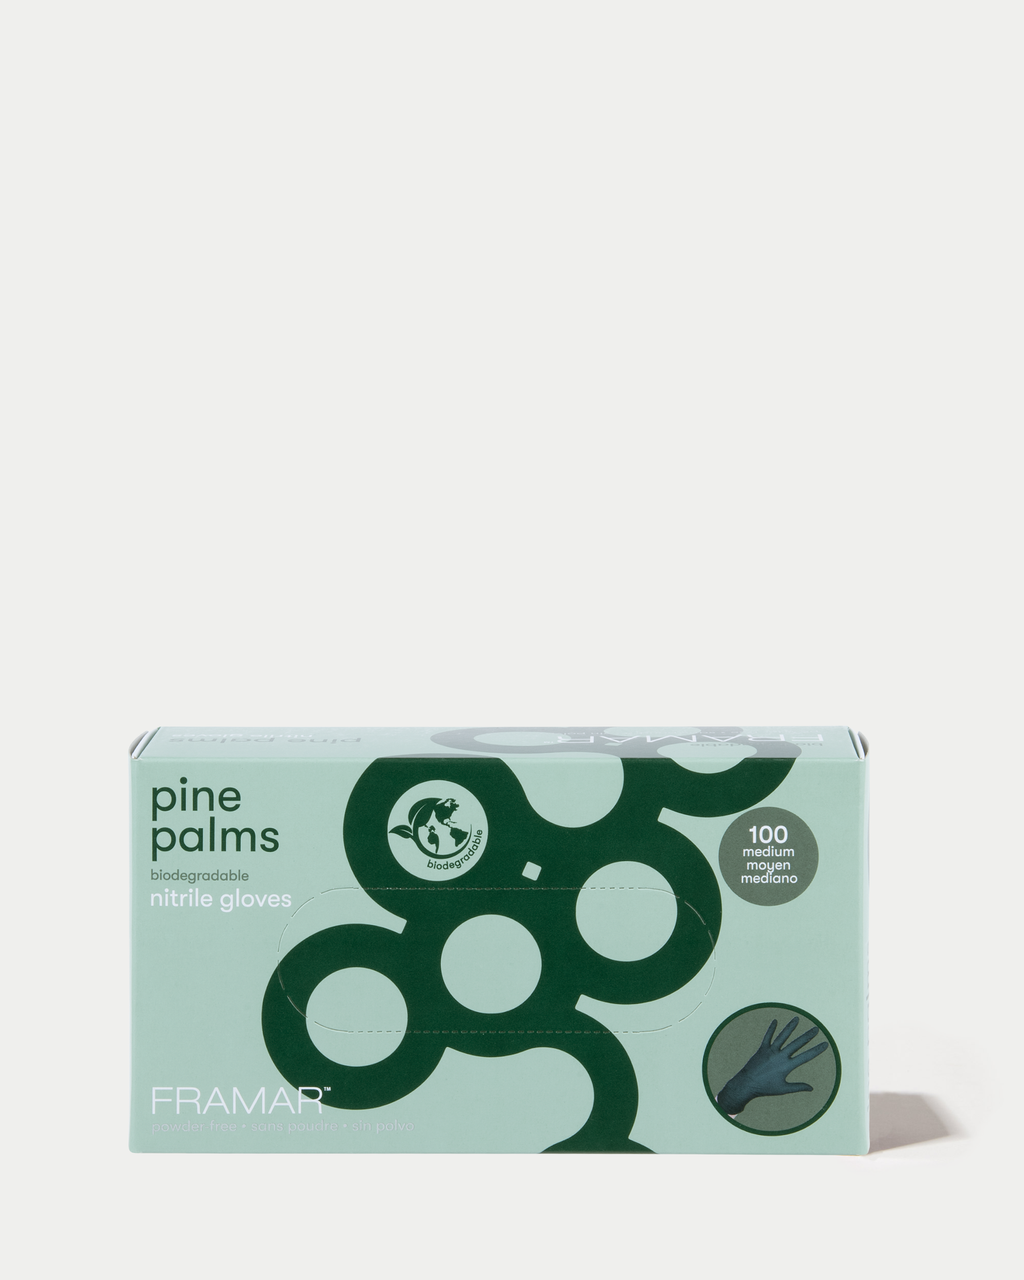 Pine Palms Biodegradable Nitrile Gloves - 100 Count